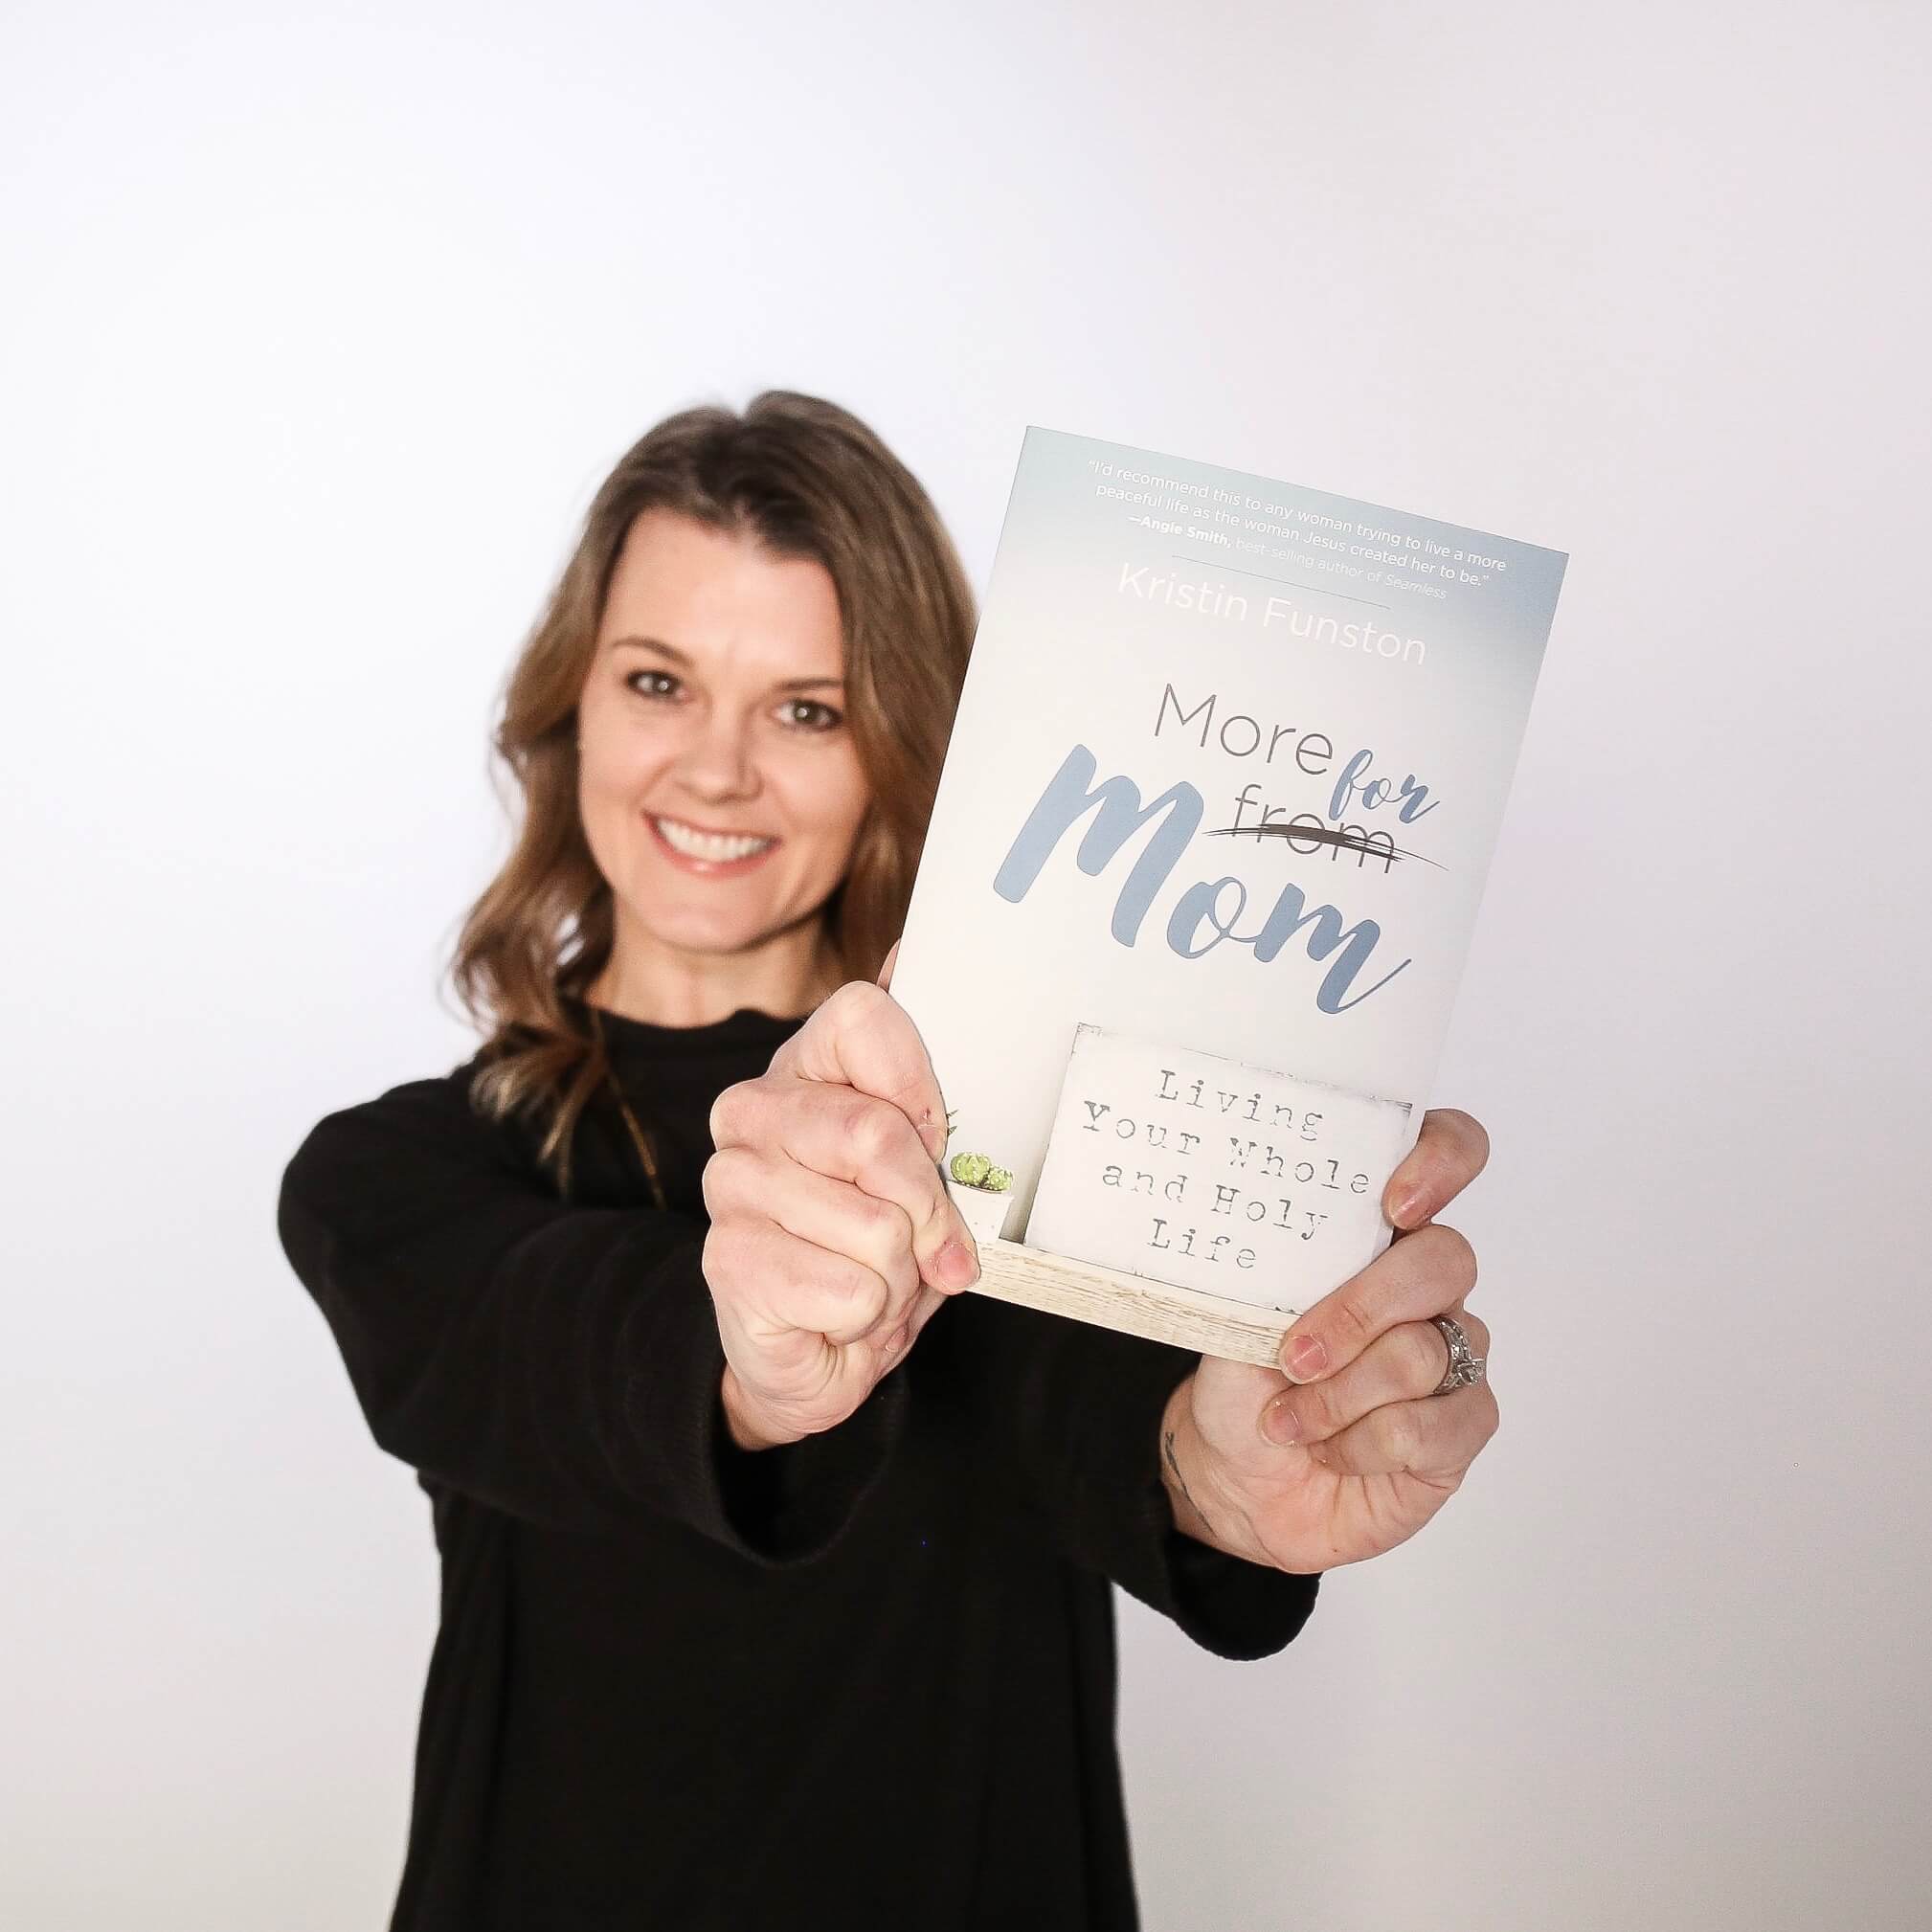 On This Book Birthday: Why I Wrote More for Mom: Living Your Whole & Holy Life